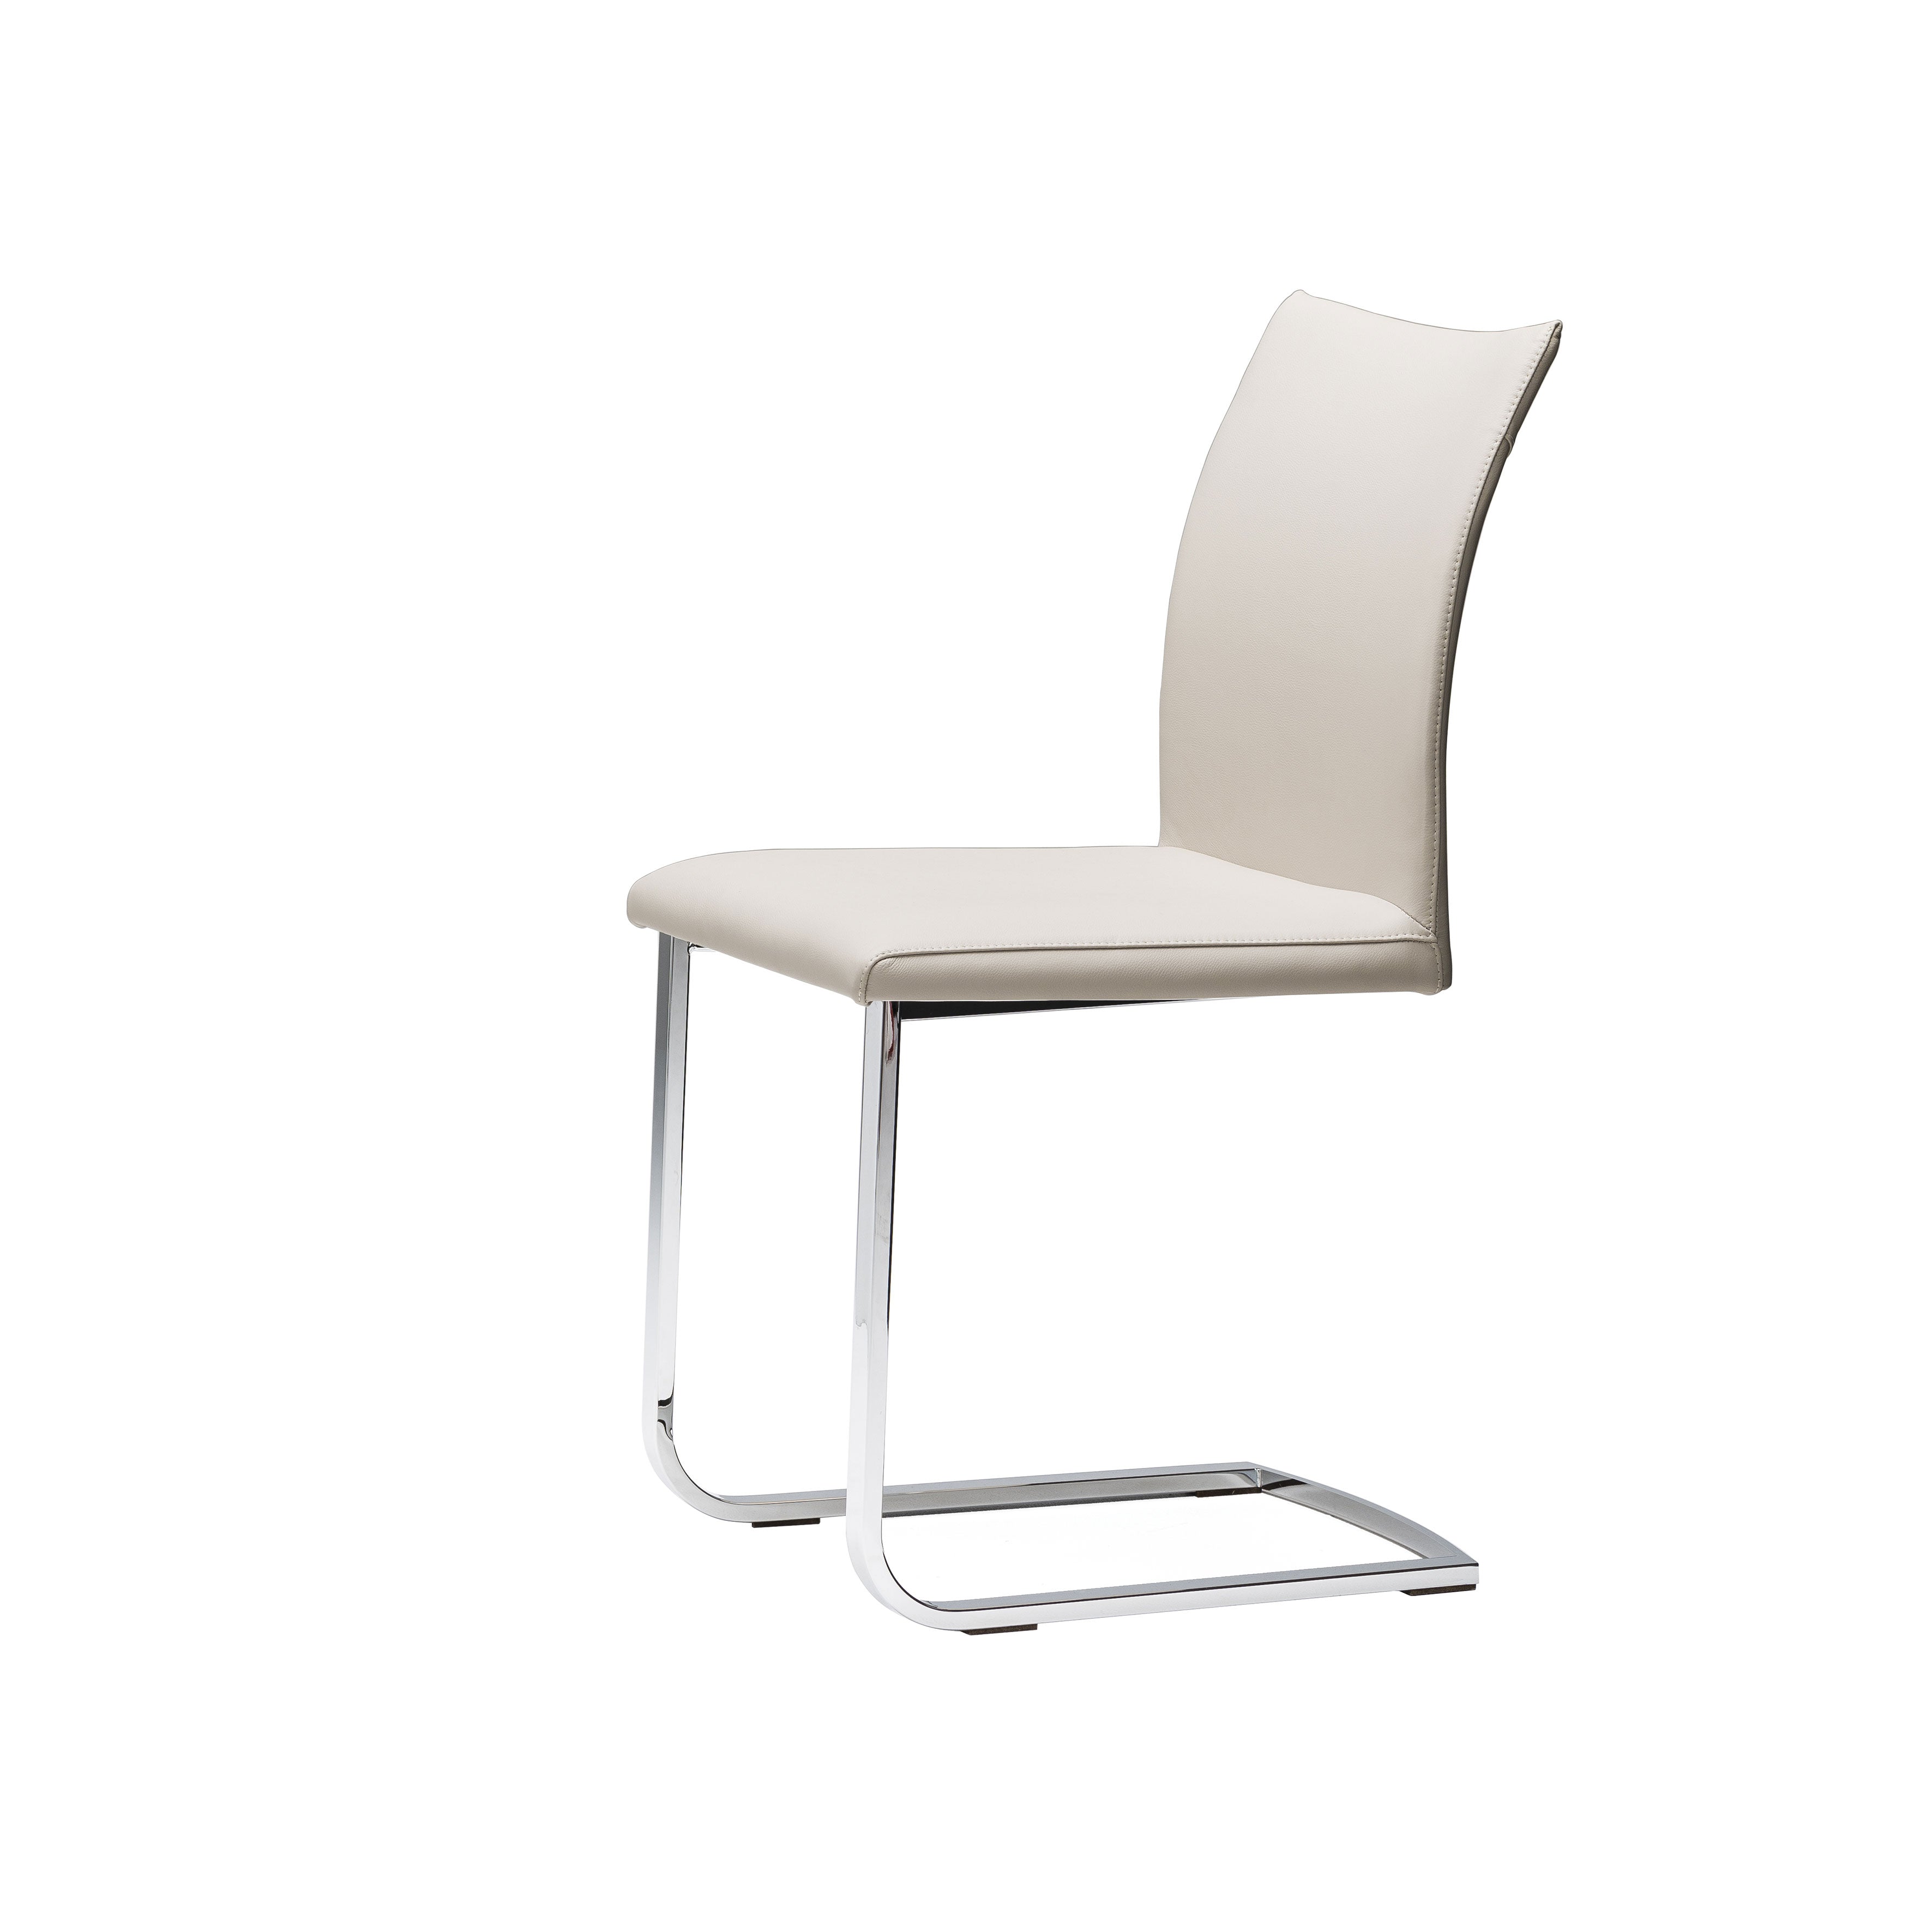 cattelan italia janet Chair with cantilever frame